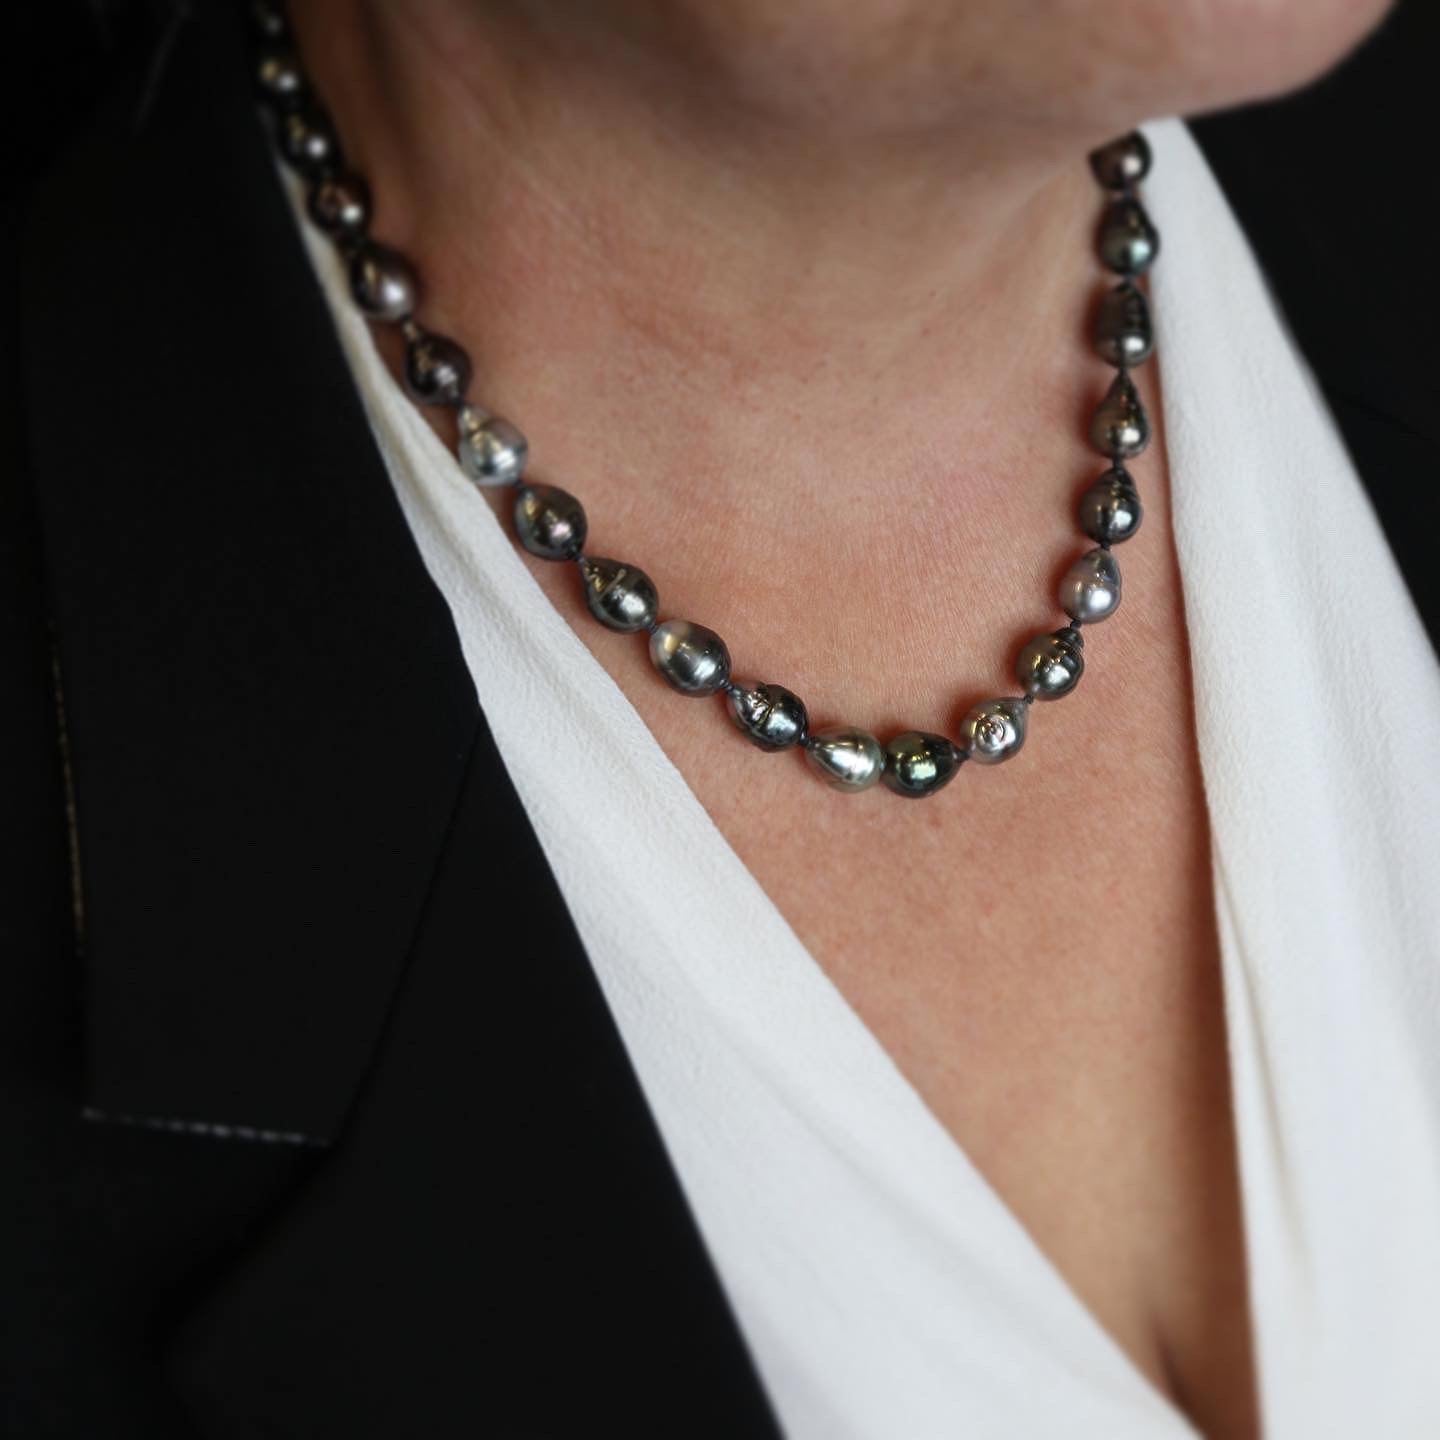 New Tahitian Pearl Necklaces in Stock - Ashley's Favorites! - Pure Pearls